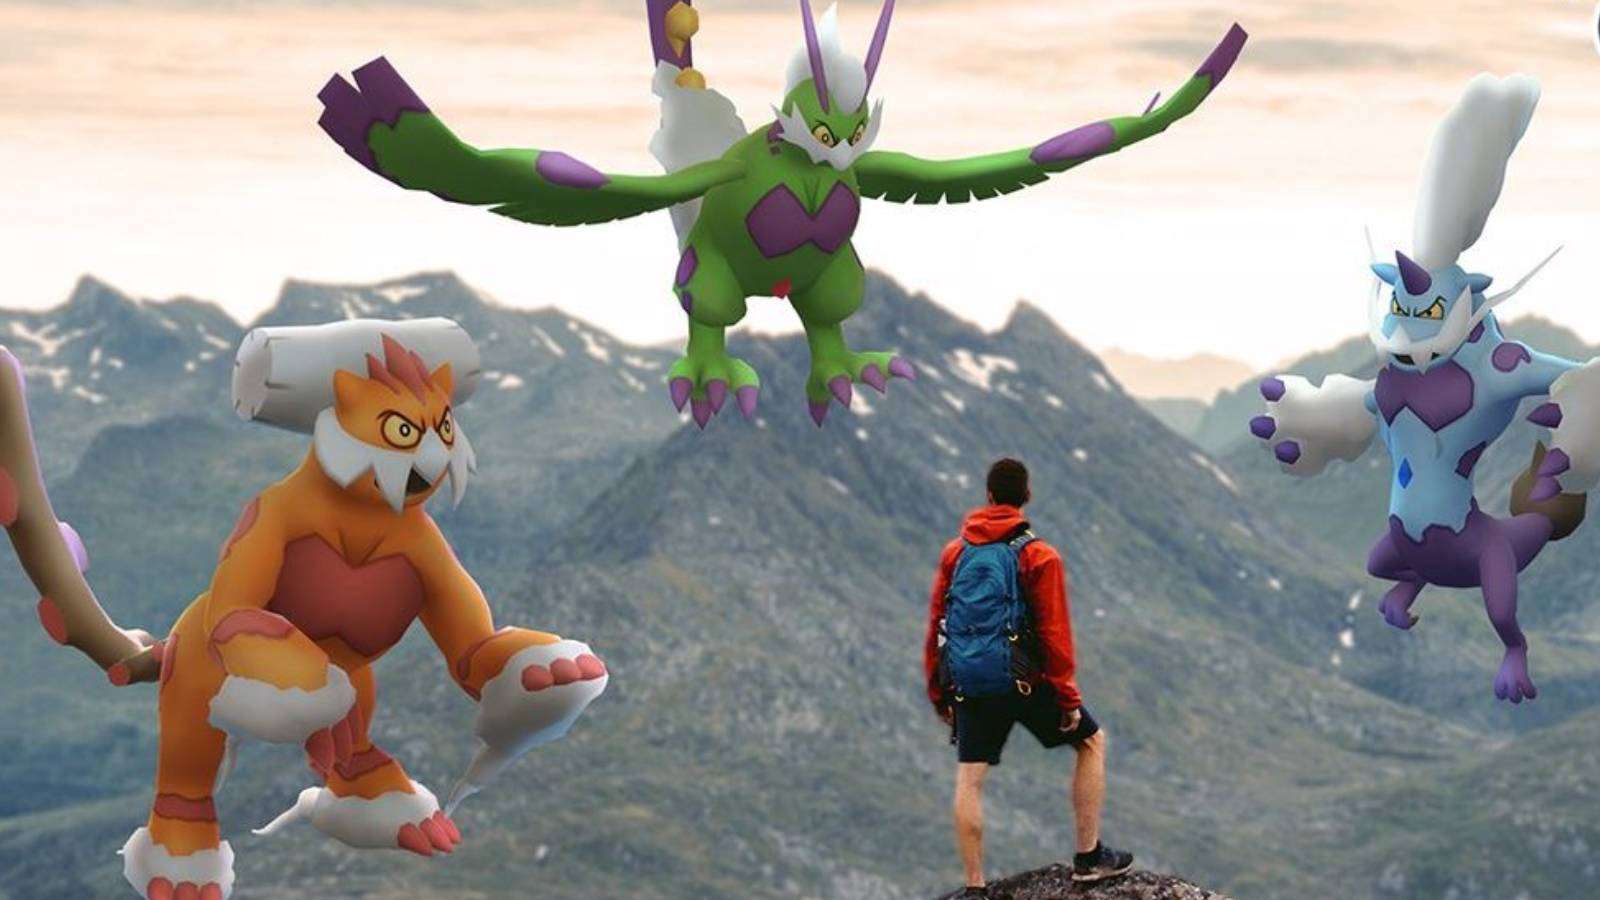 A Pokemon trainer stands on a cliff edge, faced with the Therian Forme versions of Landorus, Tornadus, and Thundurus